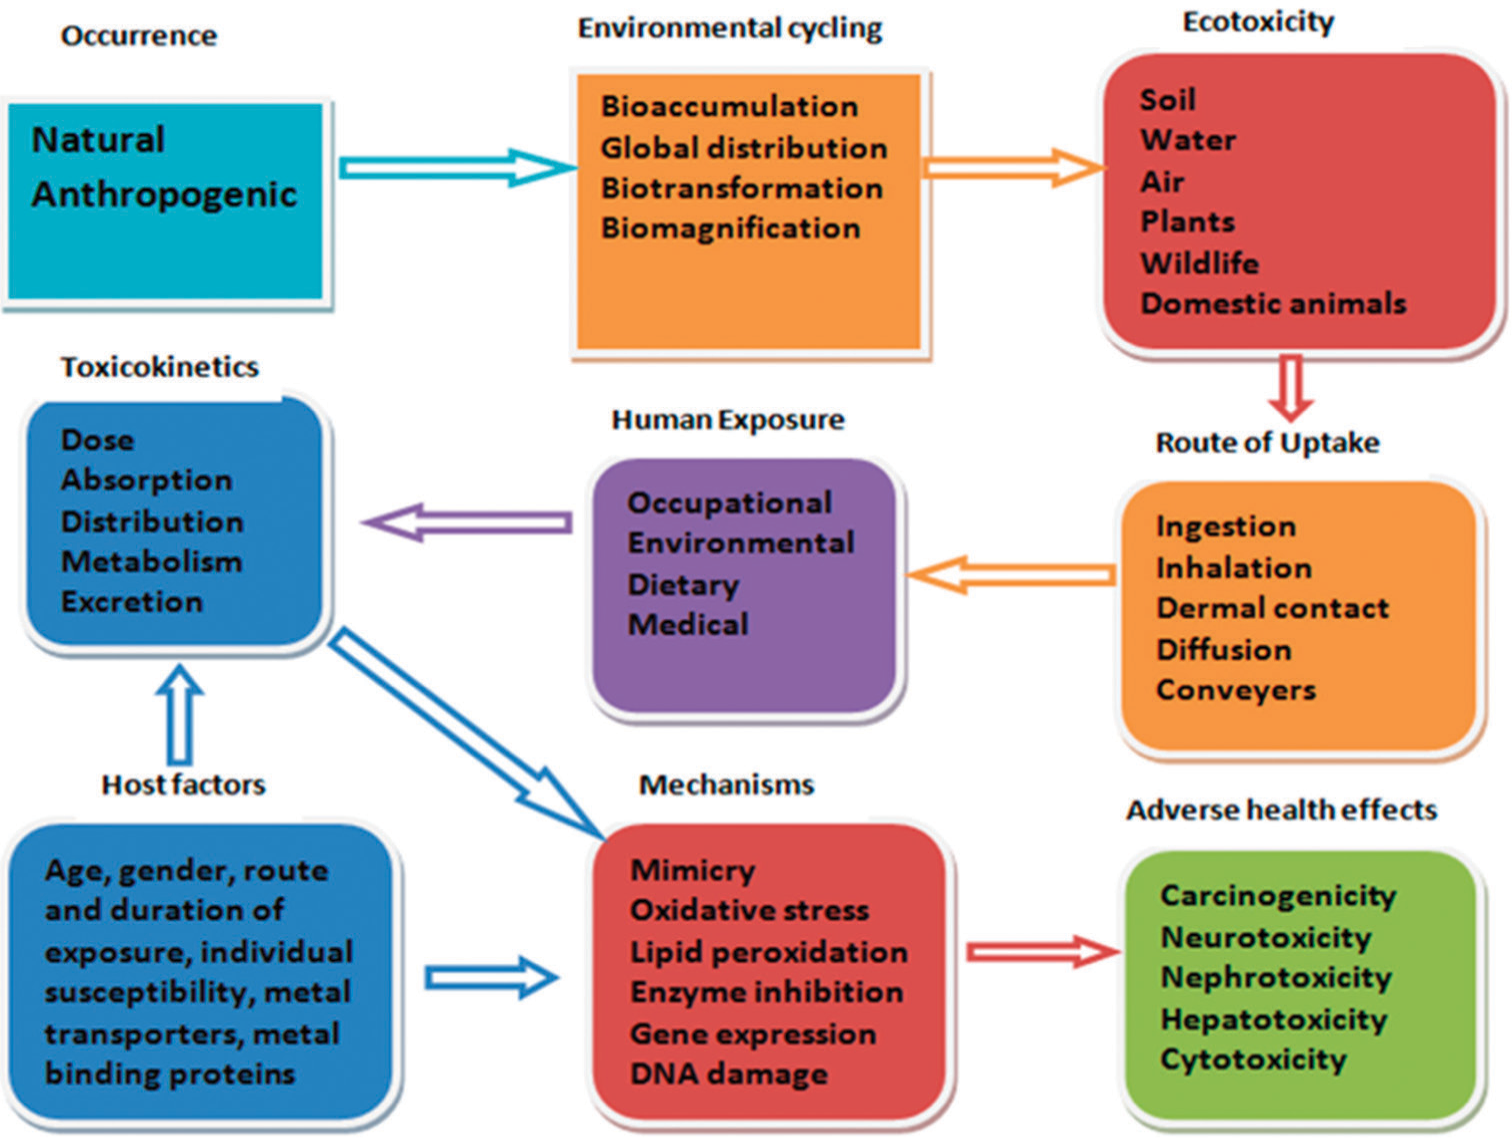 Adverse health effects of human exposure to toxic metal mixture from the environment; molecular and cellular mechanisms of toxicity indicated.[28]